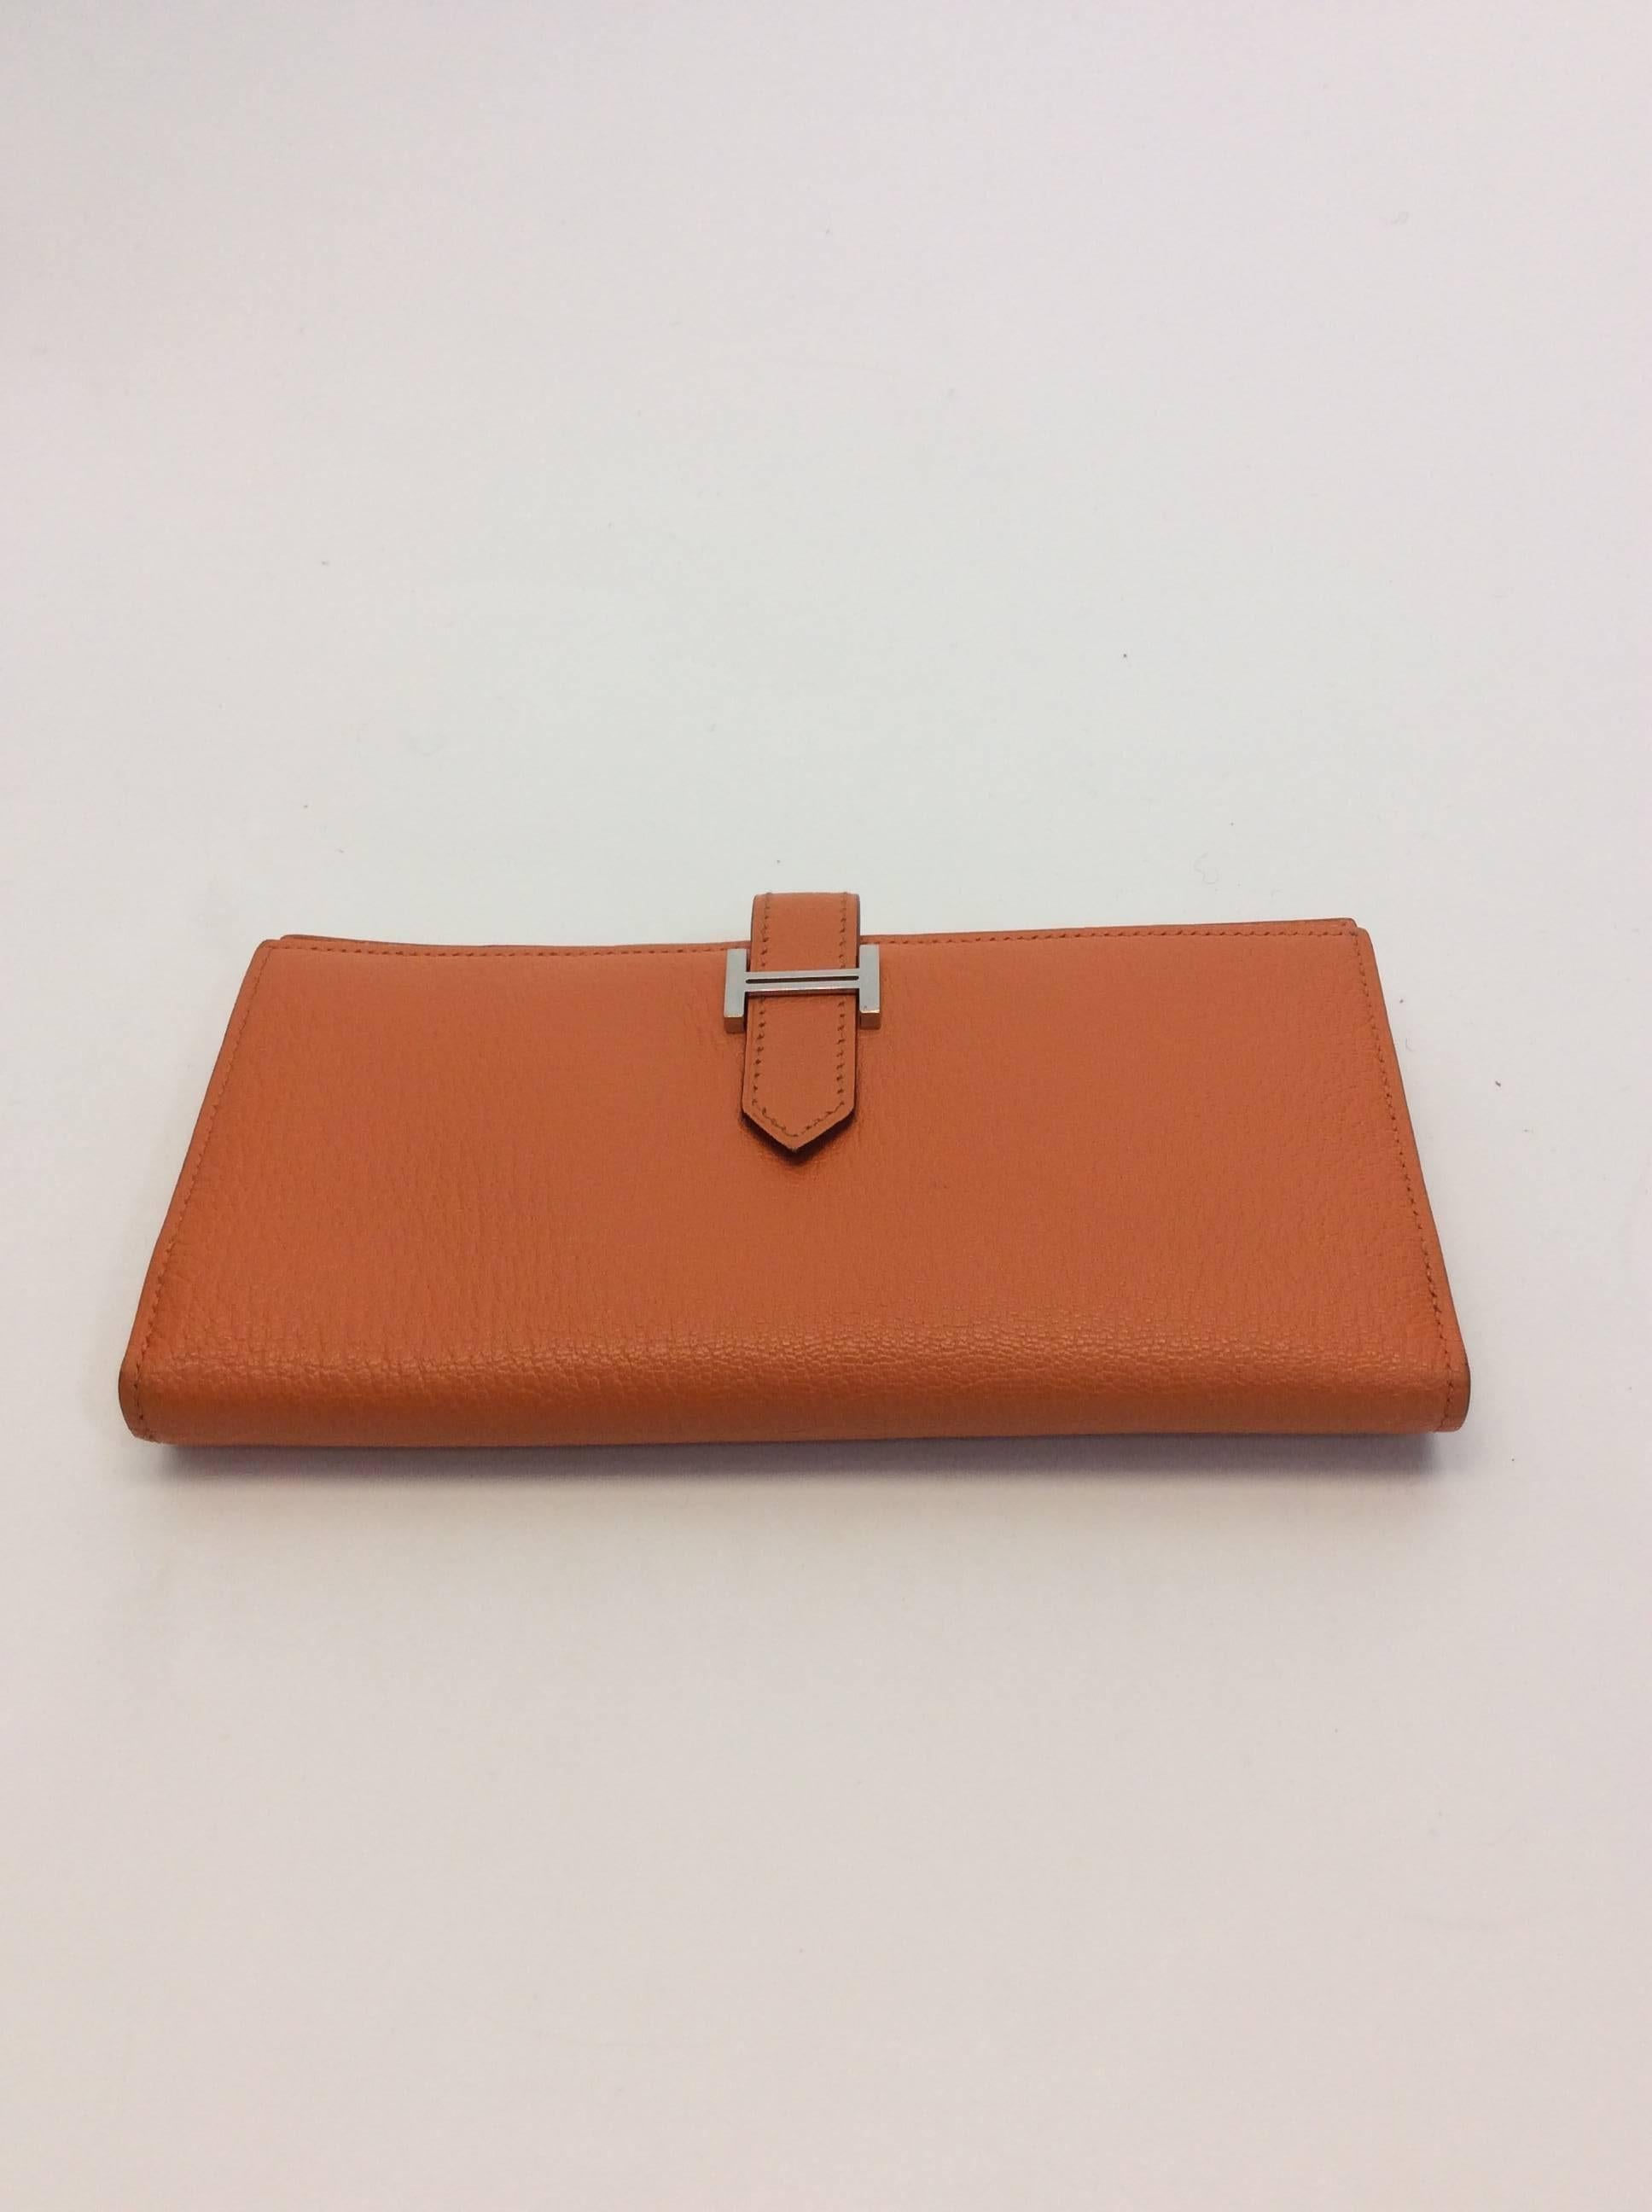 Hermes Orange Bearn Bifold Wallet
Lined with Lambskin
5 credit card slots & two additional pockets with zipper coin pocket
7 X 3.5 
Hermes H on front
Made in France
Comes with box

